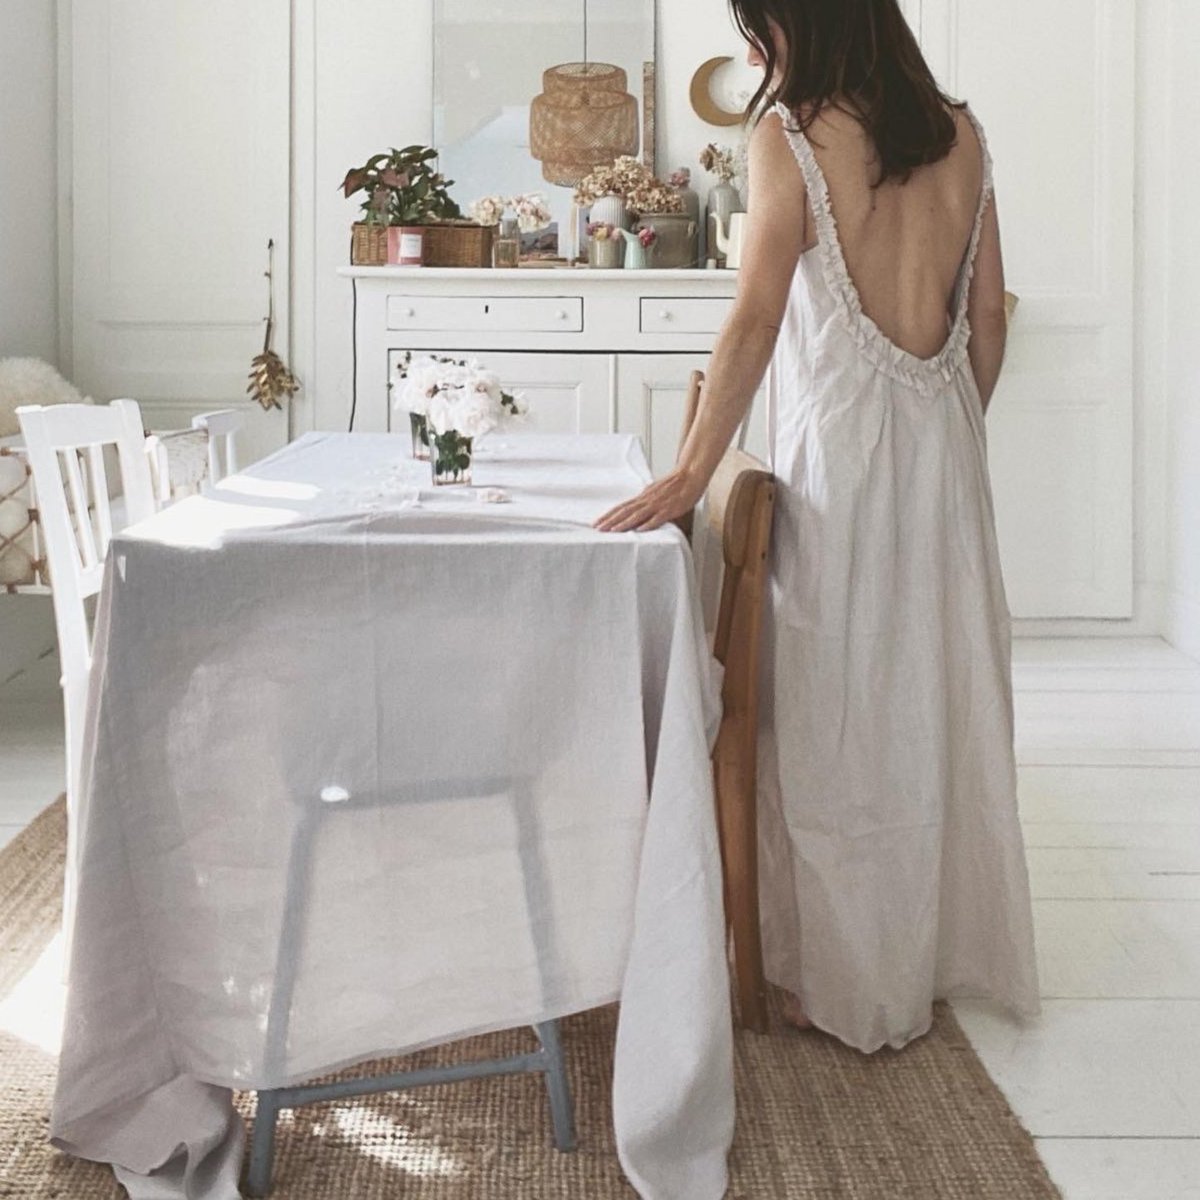 Give your home a seasonal touch with this beautiful Cream linen tablecloth.

pilleveroneboutique.com/products/table…

#tablelinen #tabledecor #tablesetting #homedecor #tablecloth #tablescapes #tabledecoration  #decoration #linen #decor #tablelinens #tableaccessories